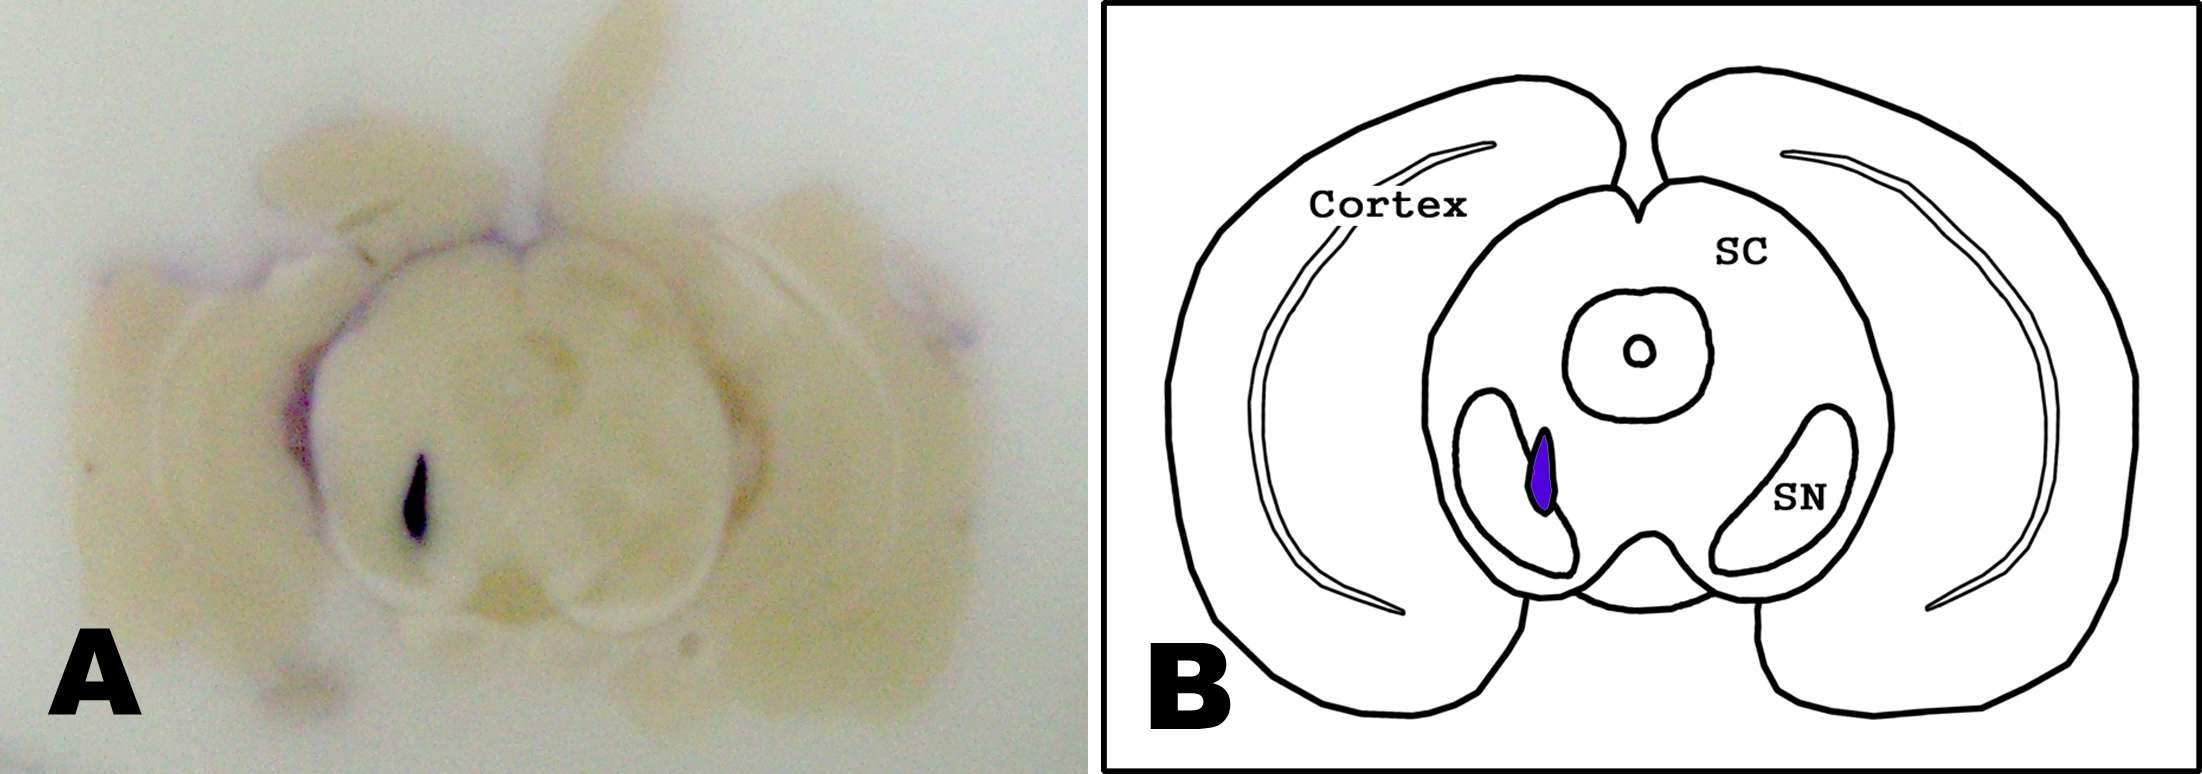 (A) Photograph of haetoxyline injection into the substantianigra (SN) and (B) the schematic diagram.